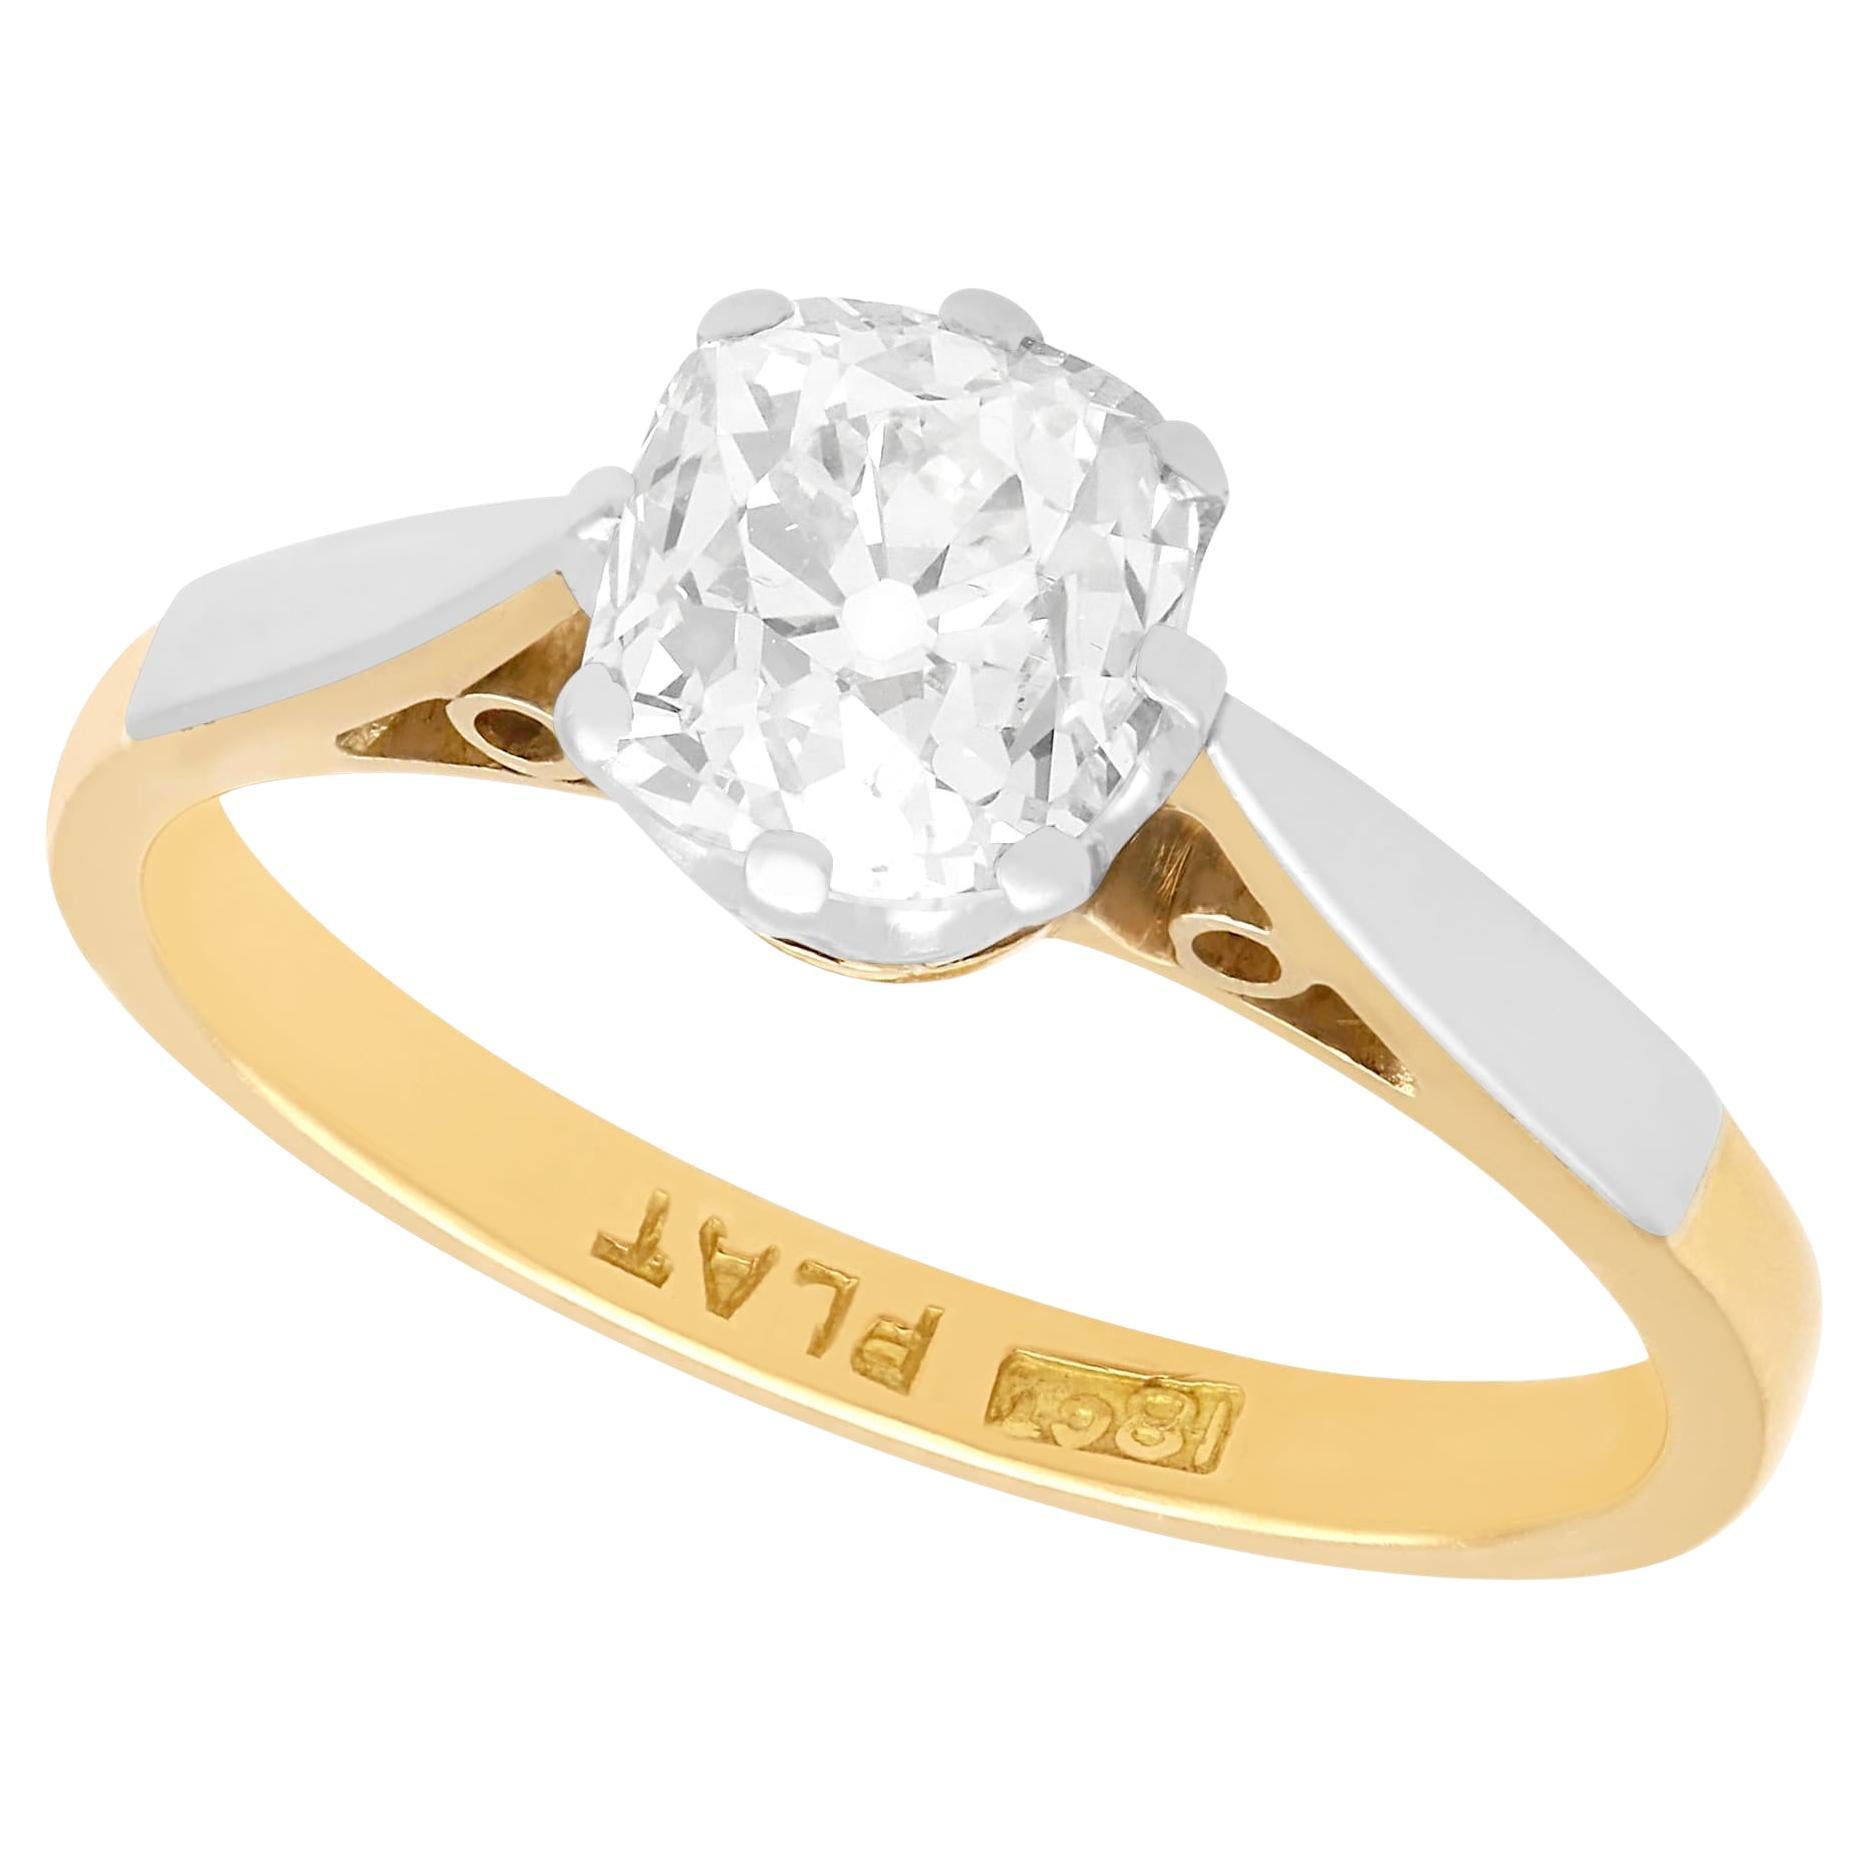 Antique 1.23 Carat Diamond and 18k Yellow Gold Solitaire Ring, circa 1910 For Sale